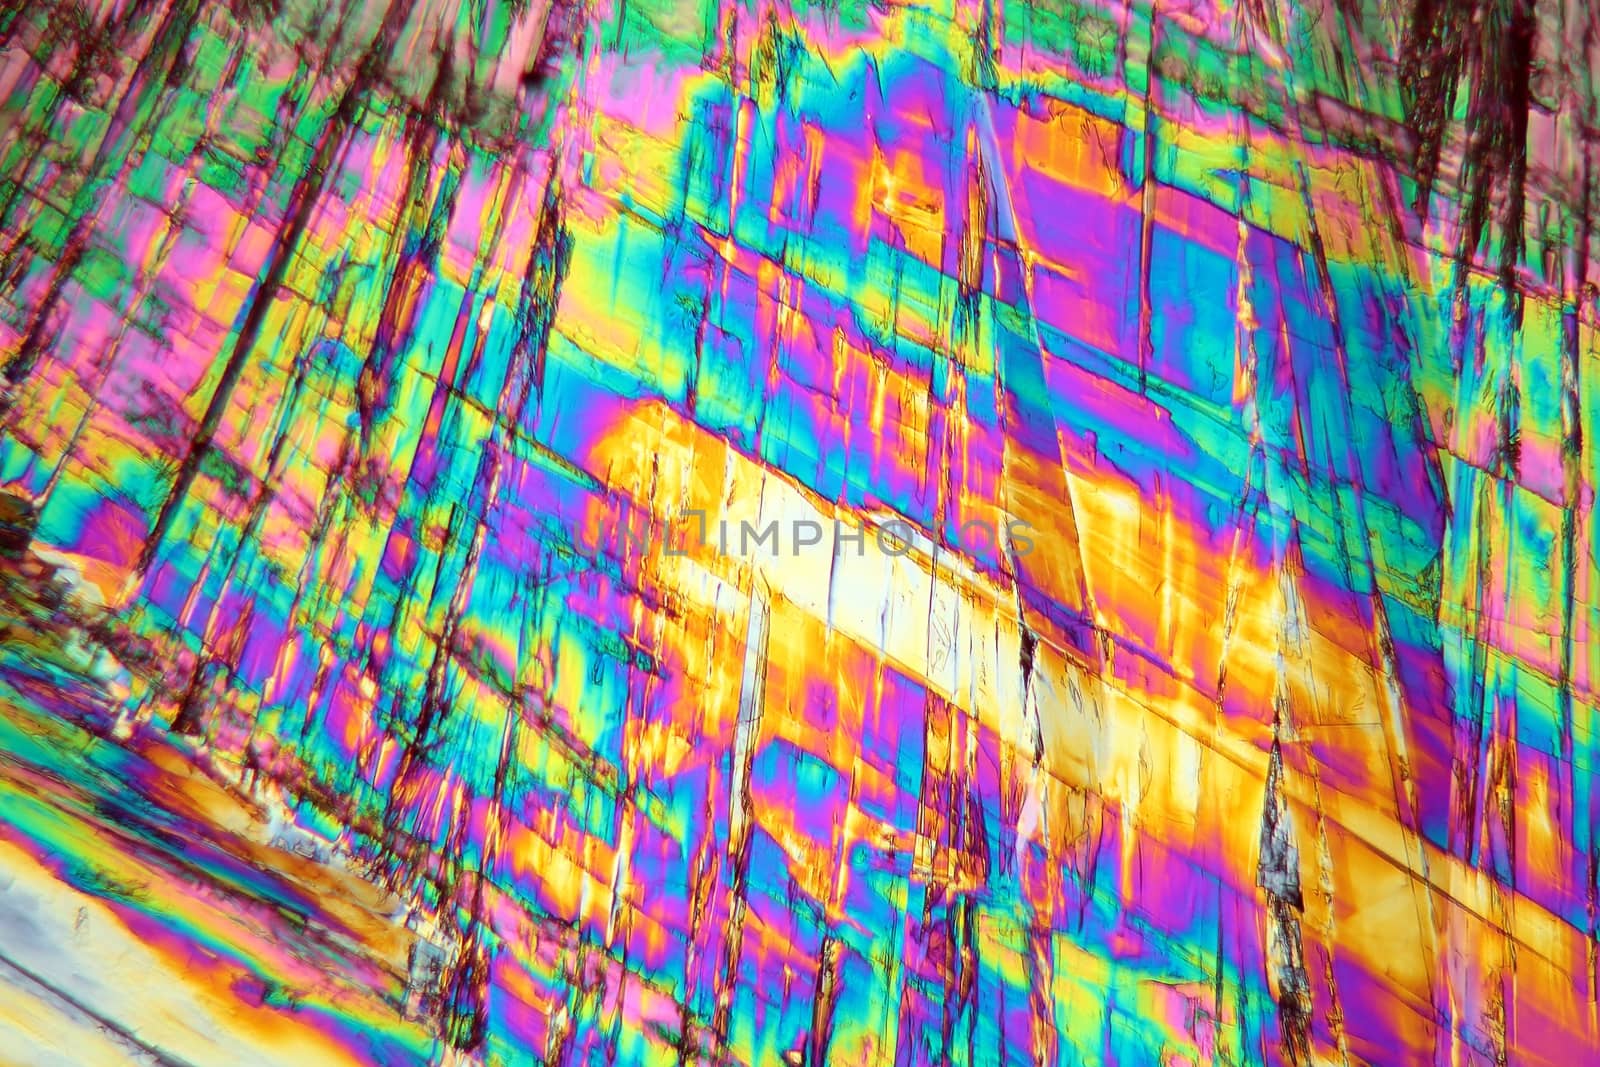 Vitamin B crystals under the microscope (magnification 80x and polarized light).